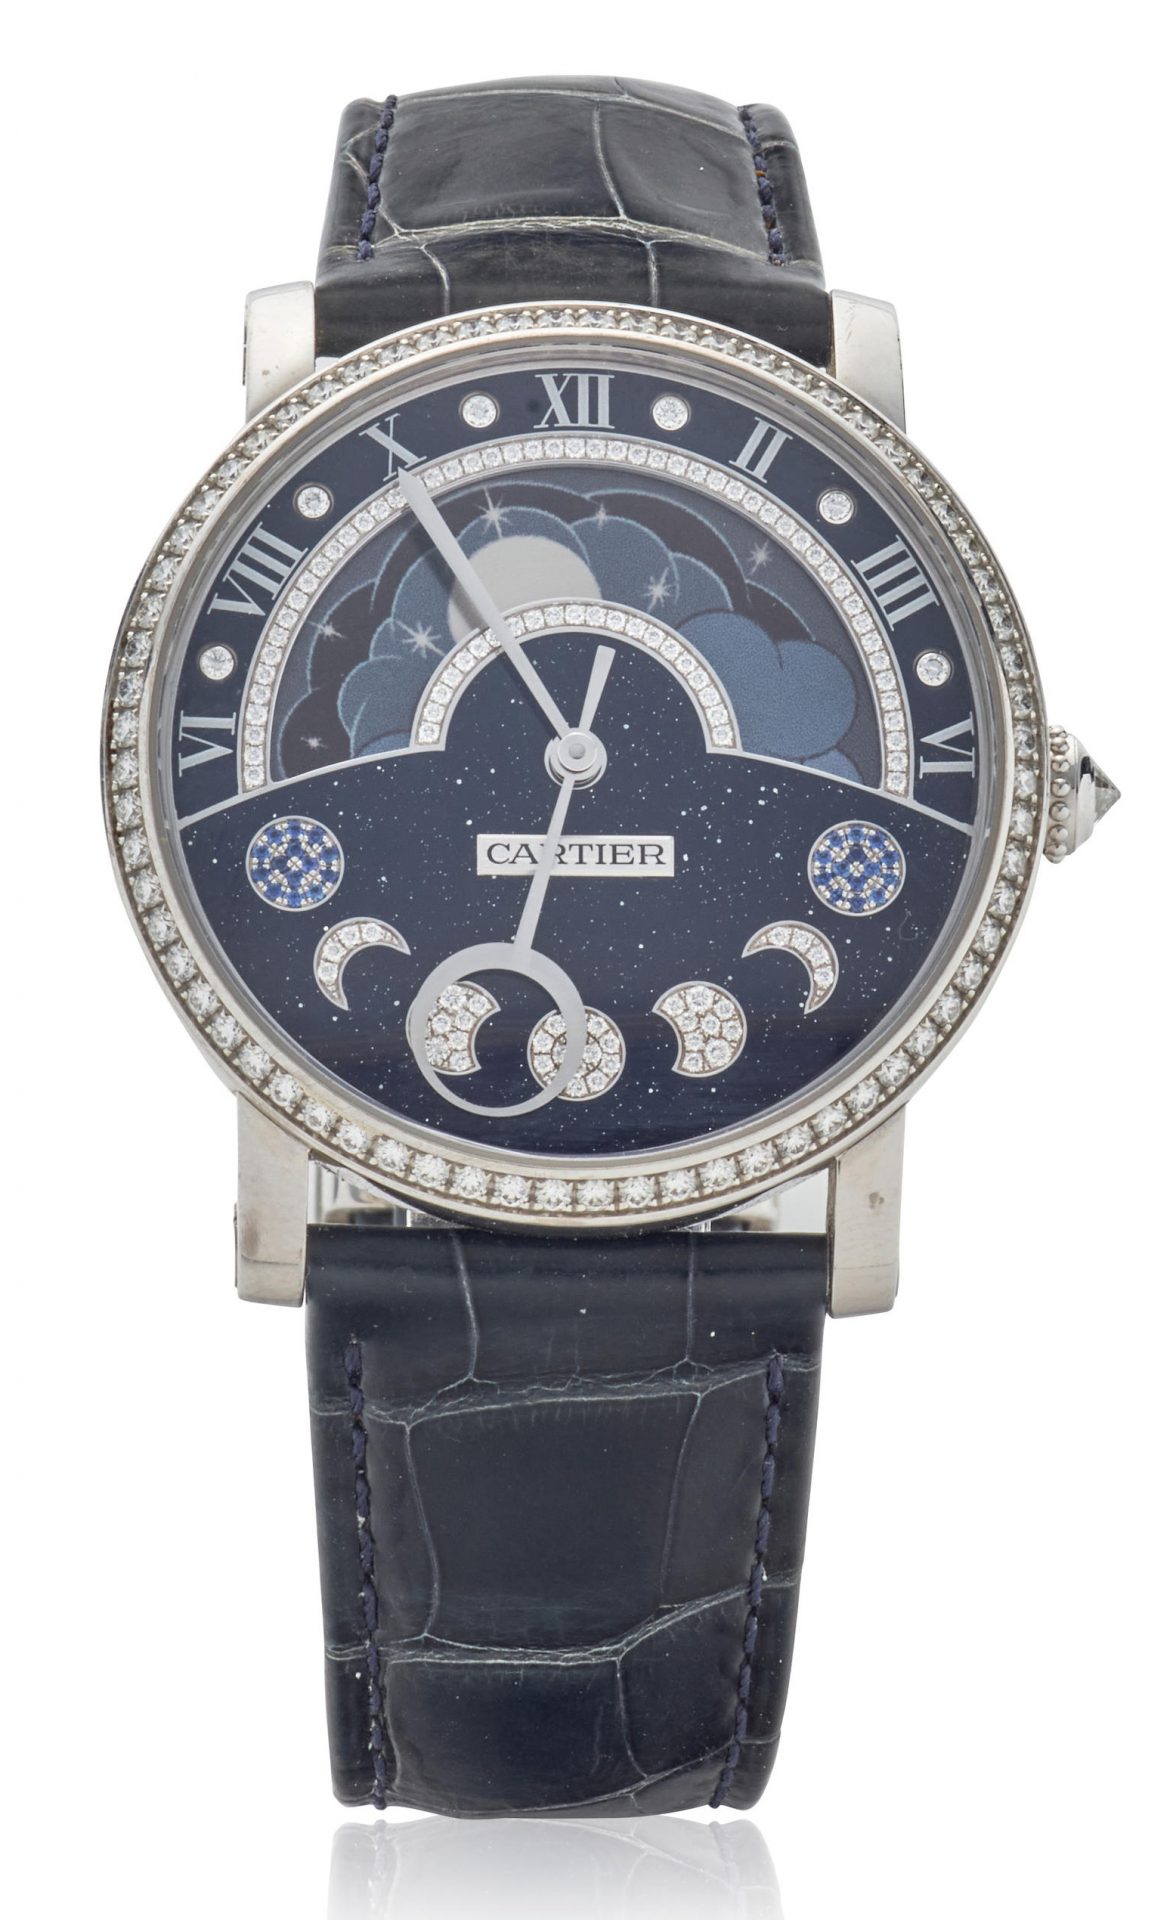 Cartier. A fine and unusual 18k white gold and diamond automatic wristwatch with retrograde moon phase